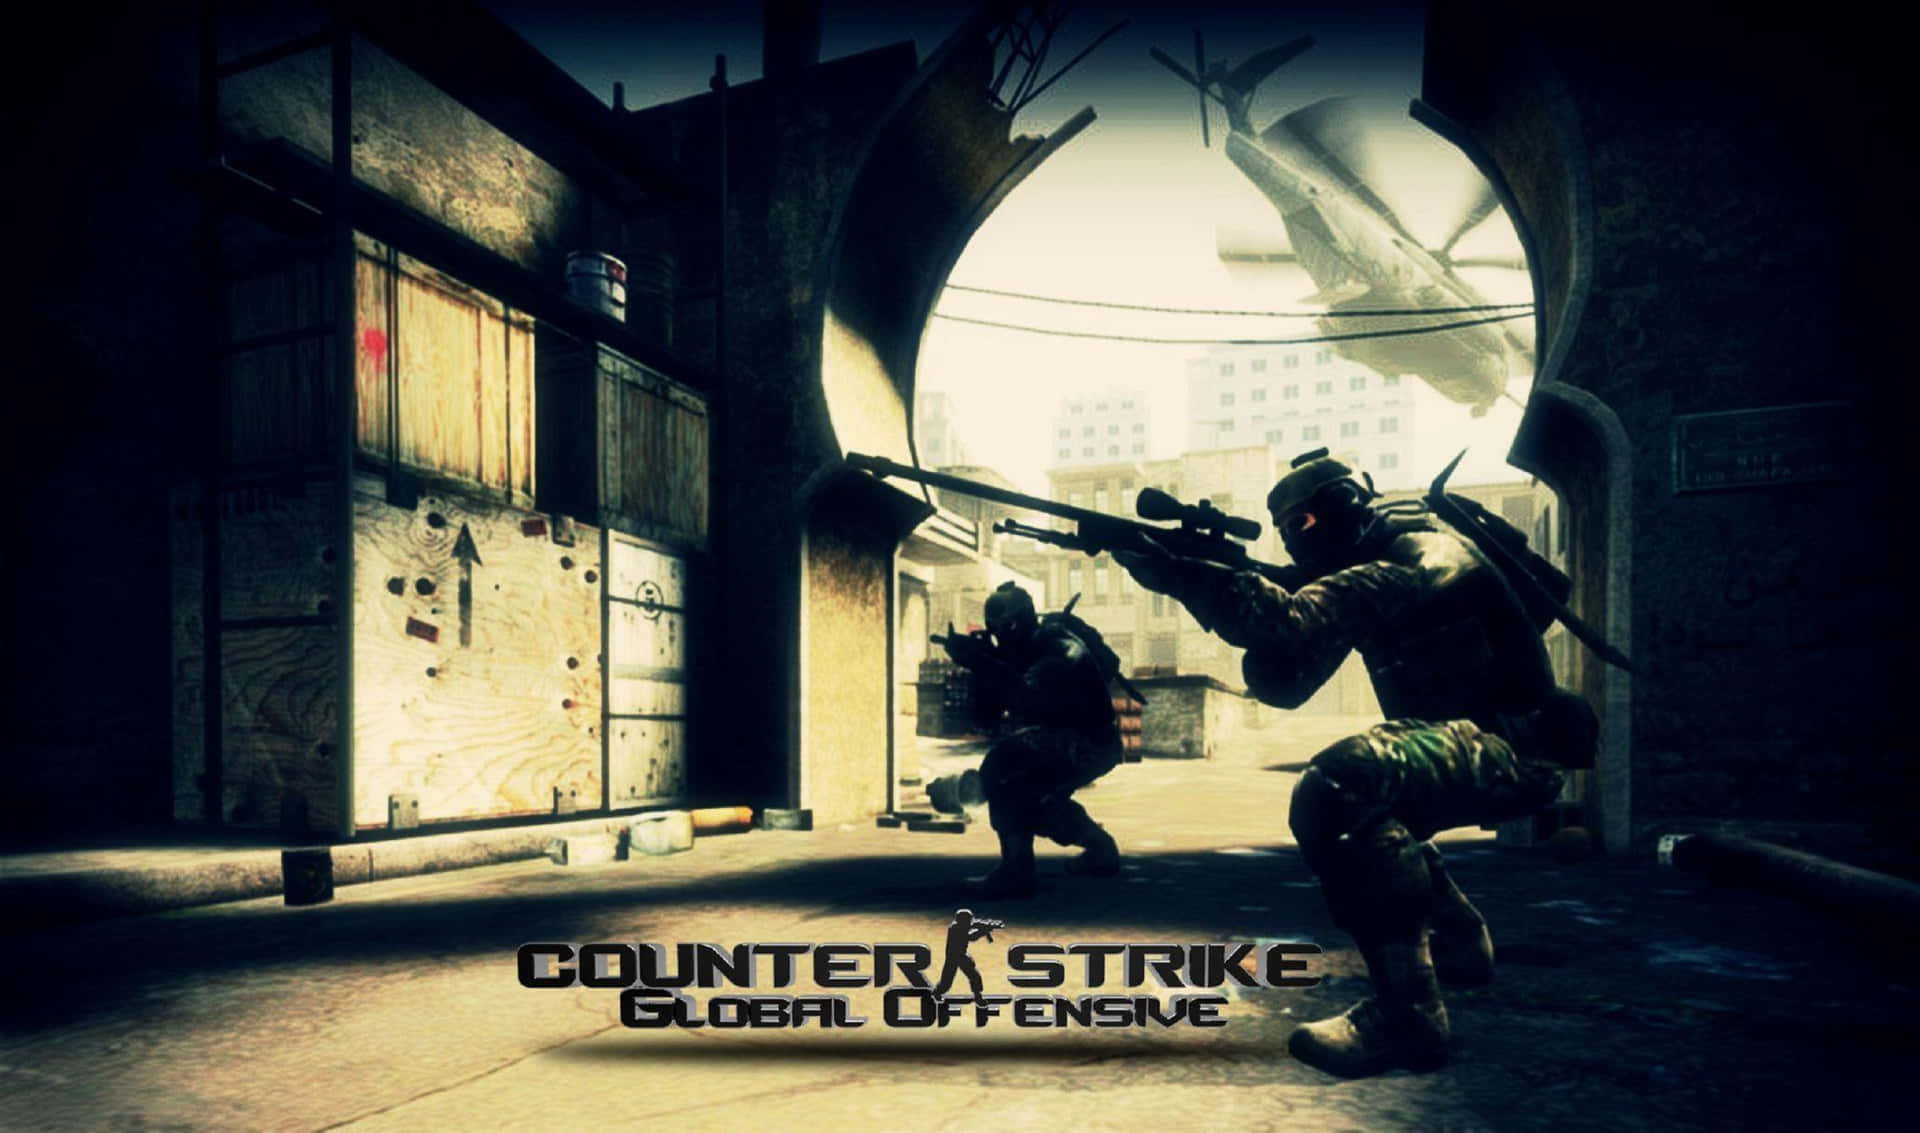 Immerse Yourself in Intense FPS Gaming with Counter-Strike: Global Offensive